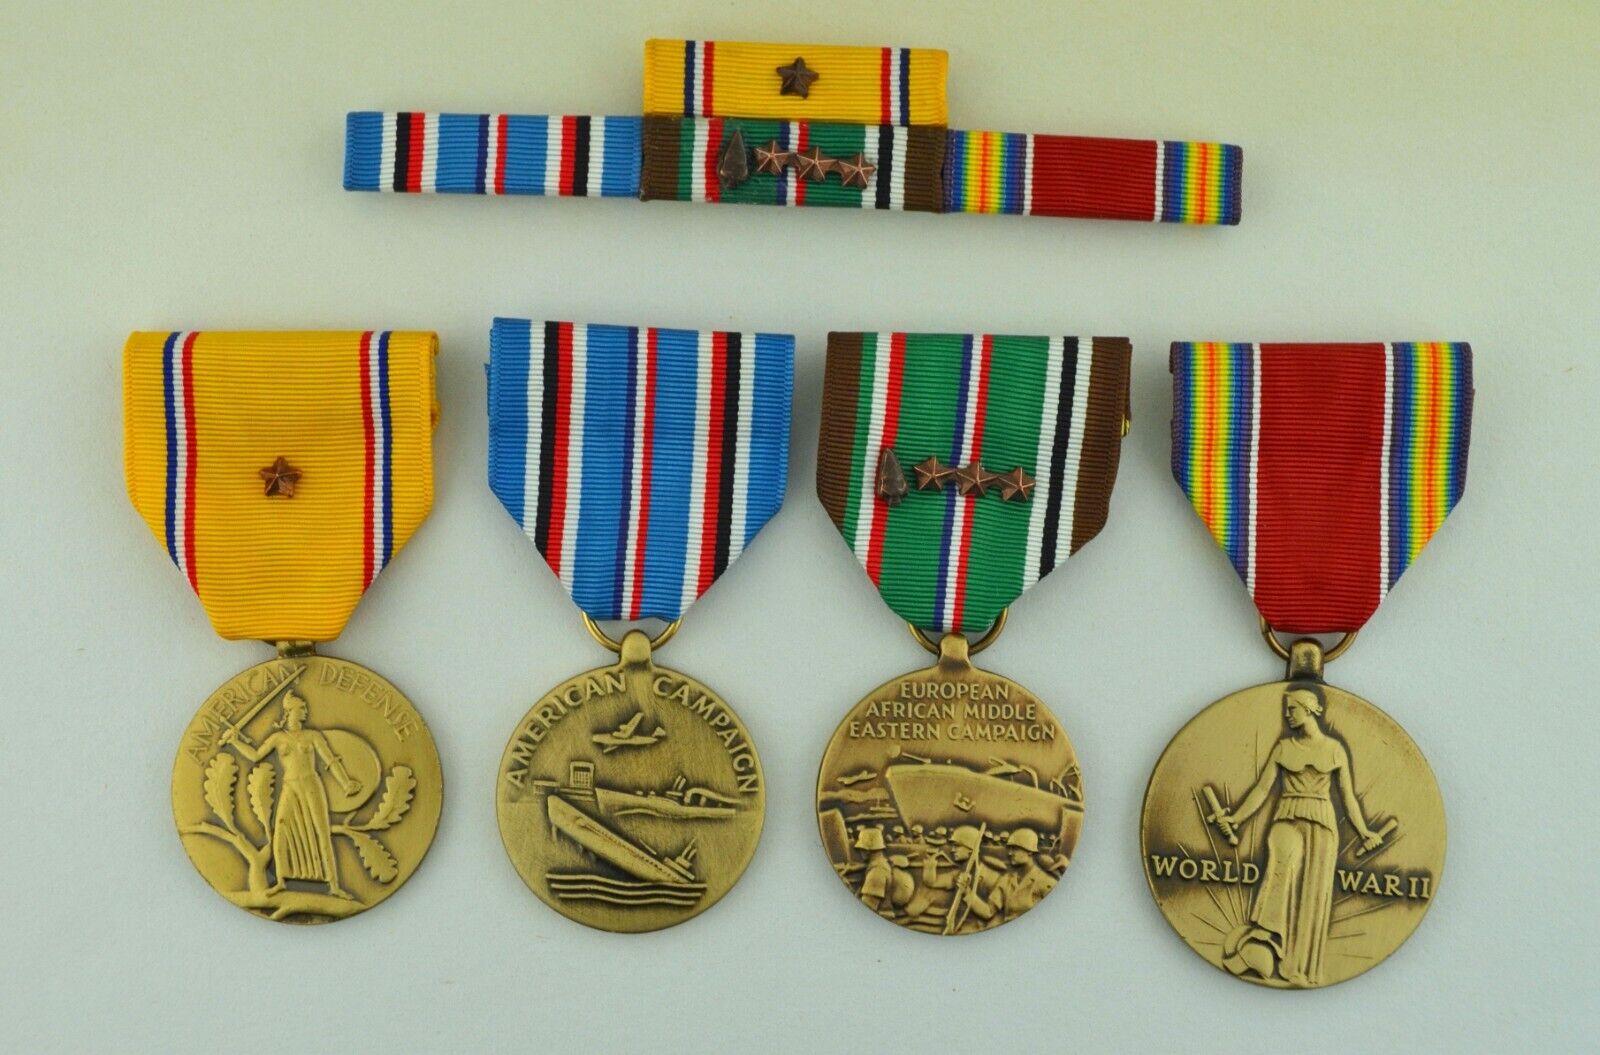 WWII Medals & Ribbons - European Theater - Arrowhead & 3 Campaign Stars